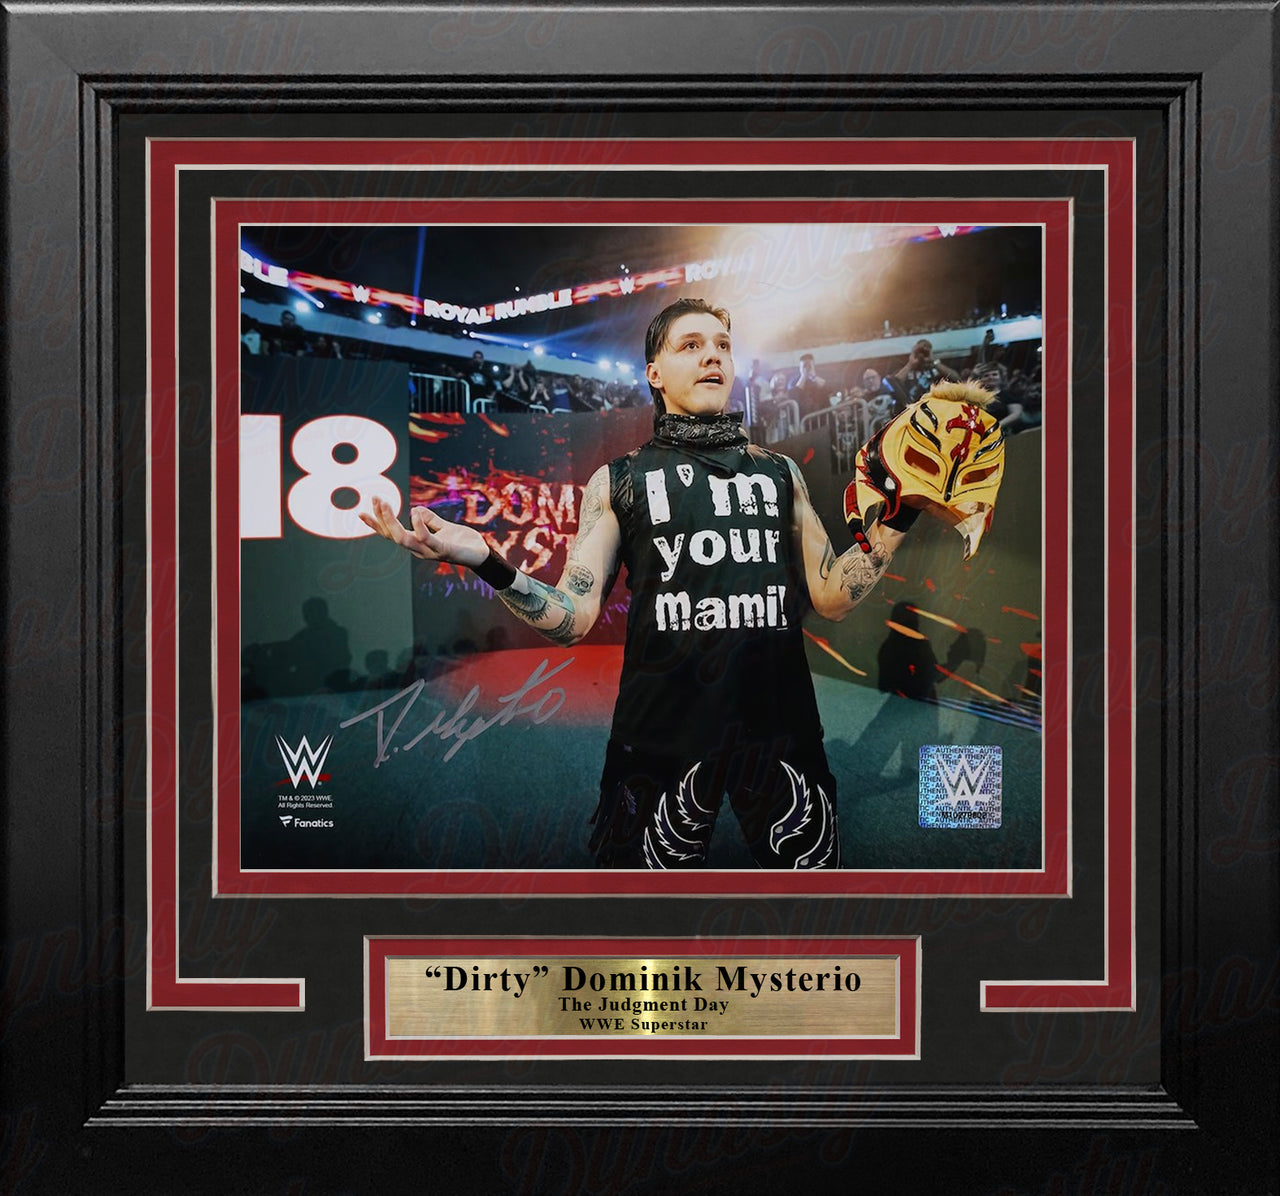 Dominik Mysterio Royal Rumble Entrance Autographed 8" x 10" Framed WWE Wrestling Photo